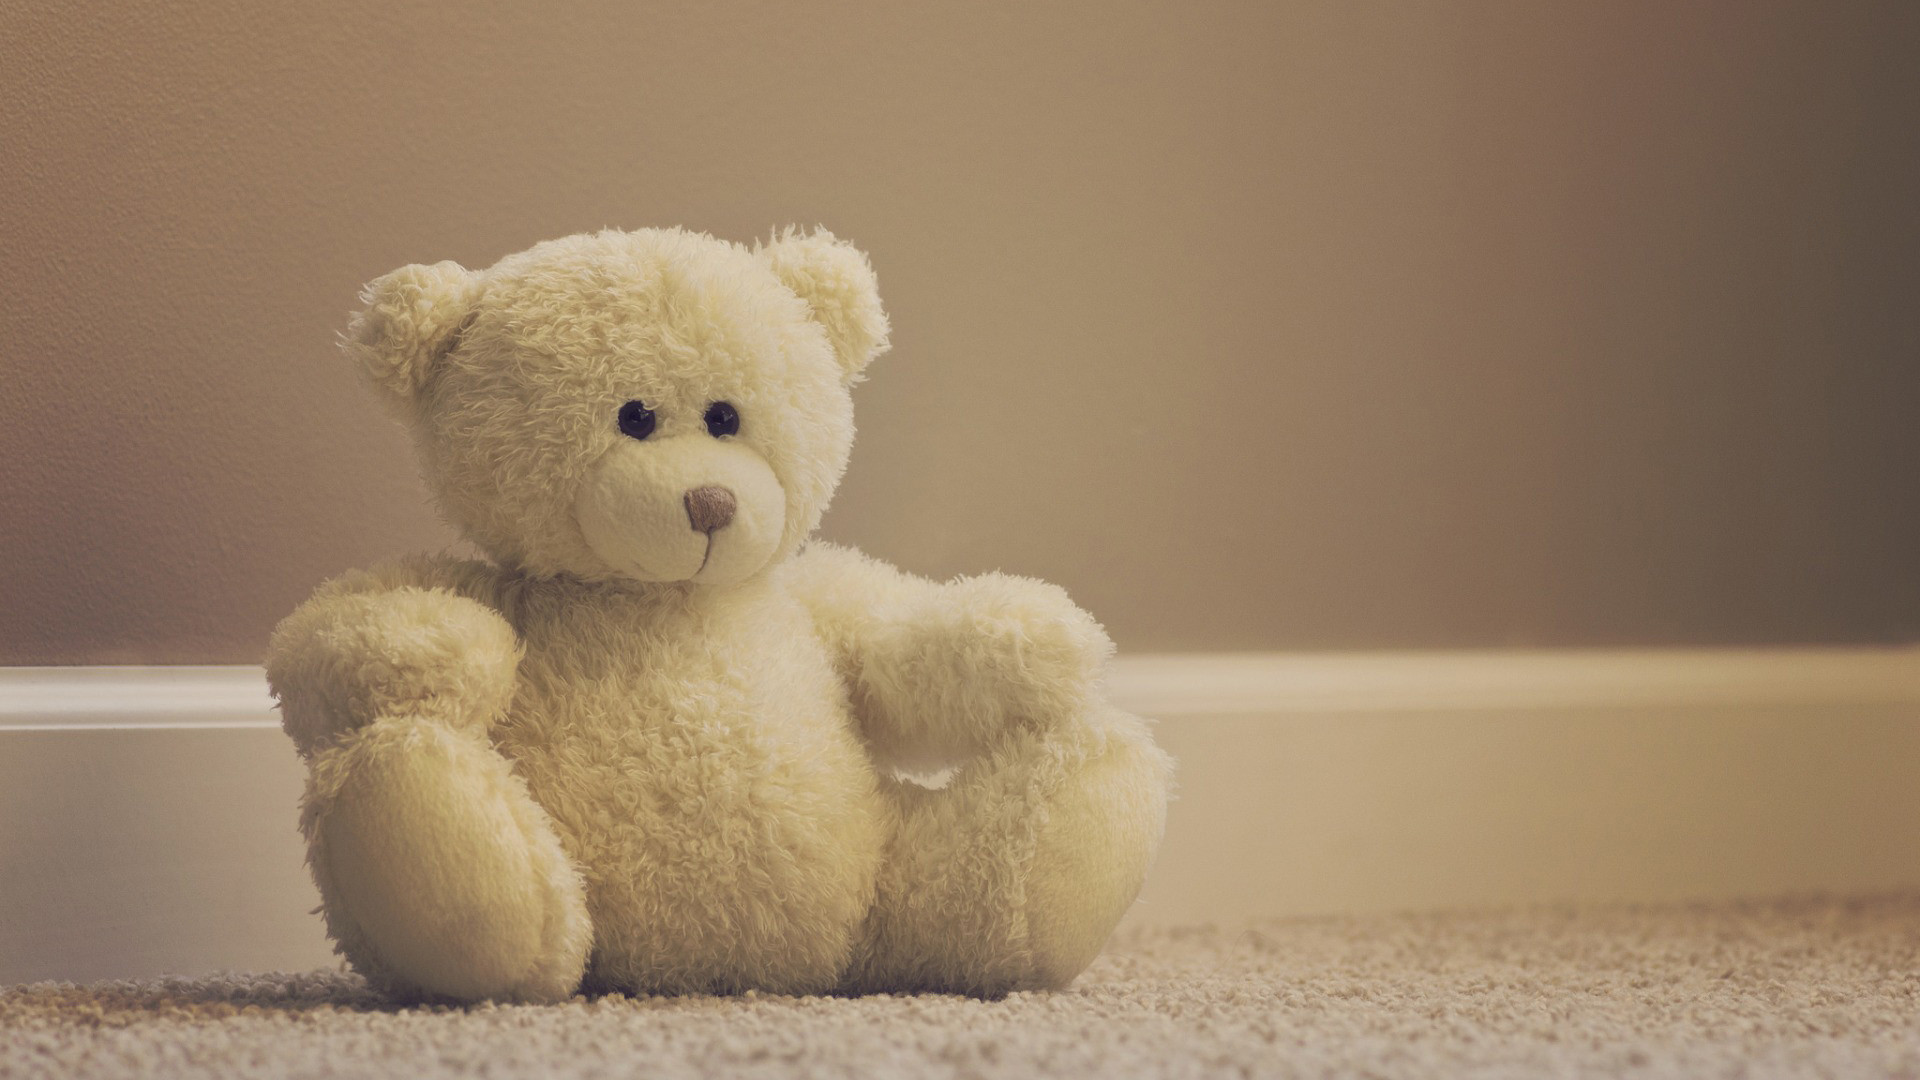 1920x1080 Teddy Bear Live Wallpaper - Android Apps on Google Play ...